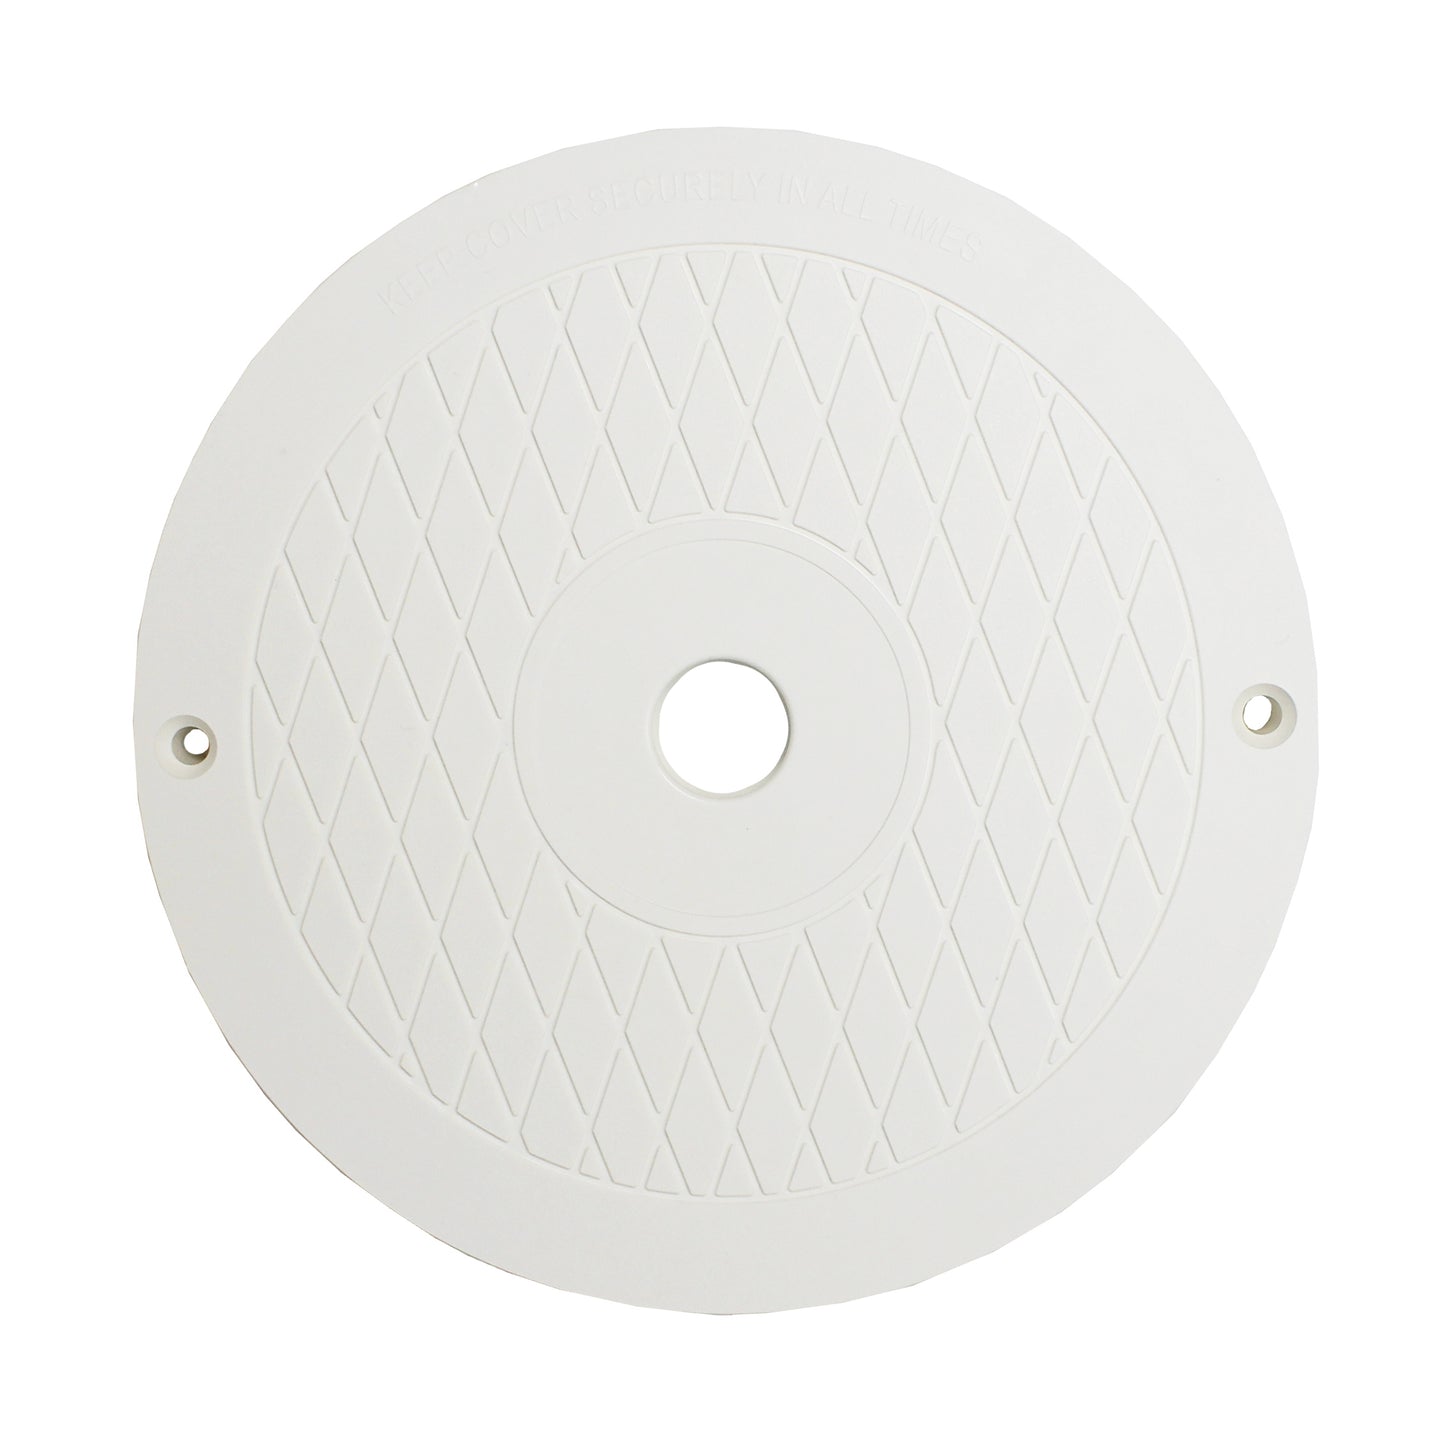 8.5" Round Skimmer Deck Lid Cover Replacement for Hayward Swimming Pool SPX1084